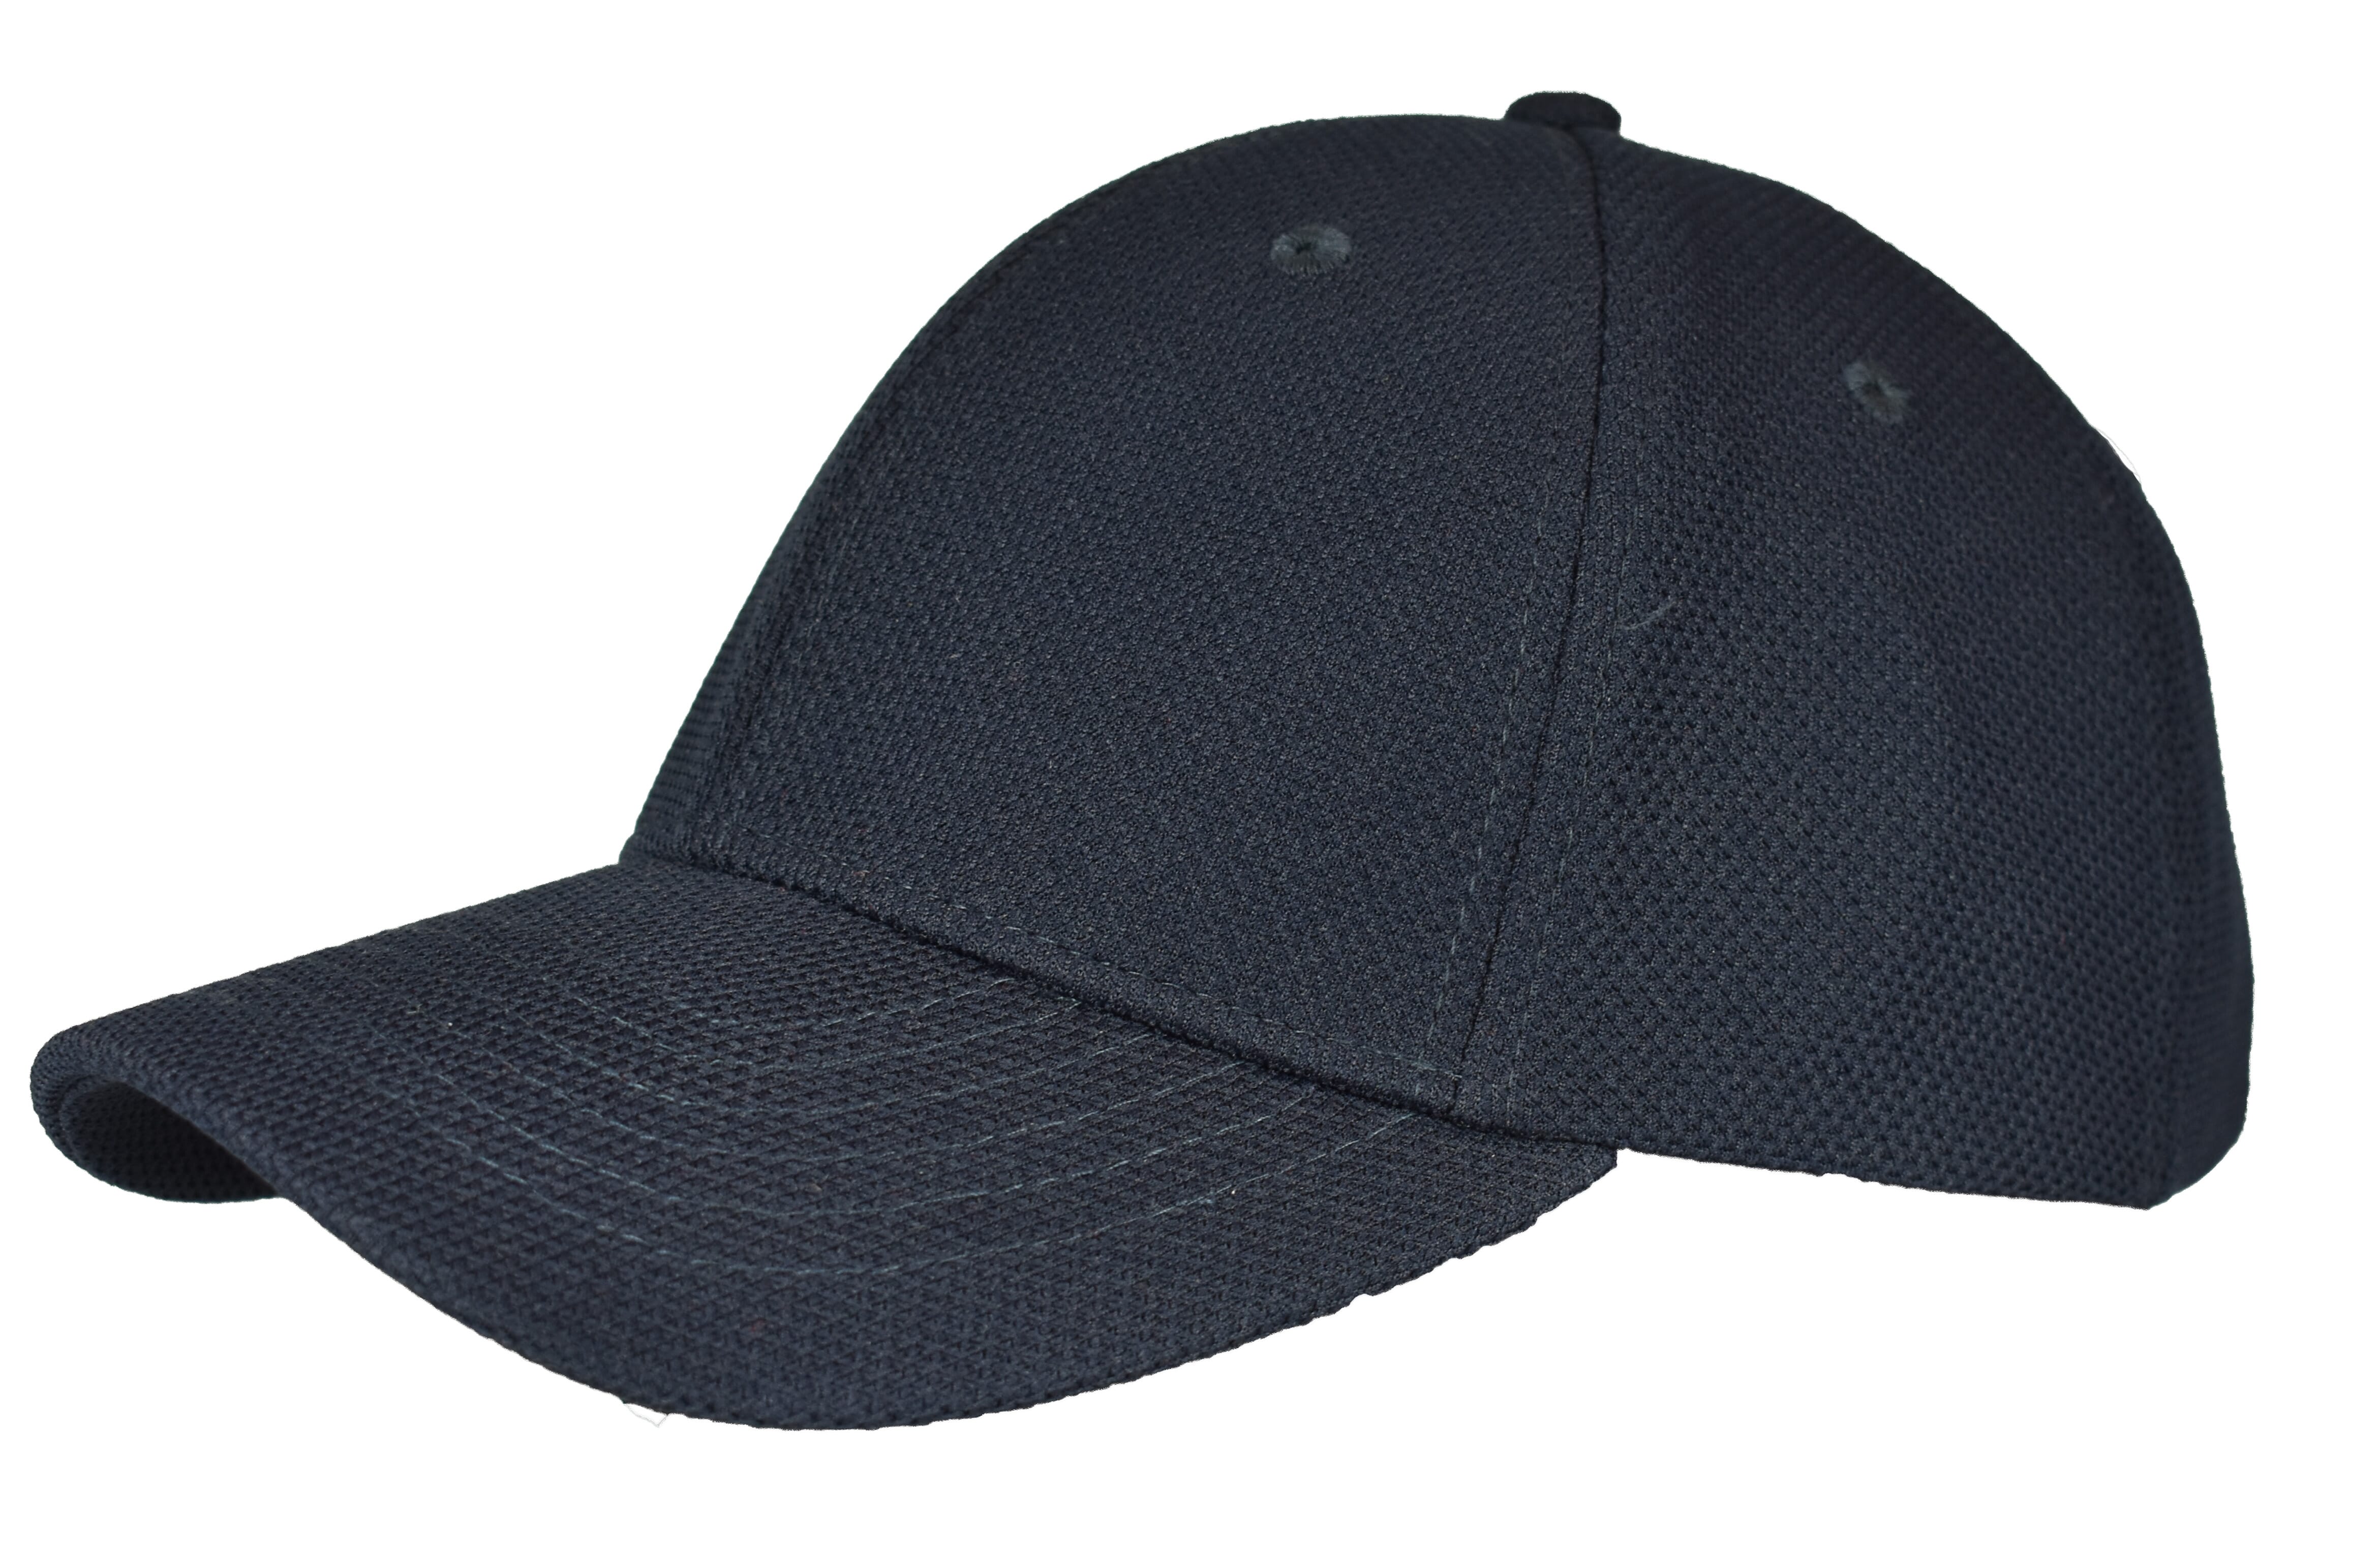 CoolFit Cap - Abbots Langley - Newport Pagnell